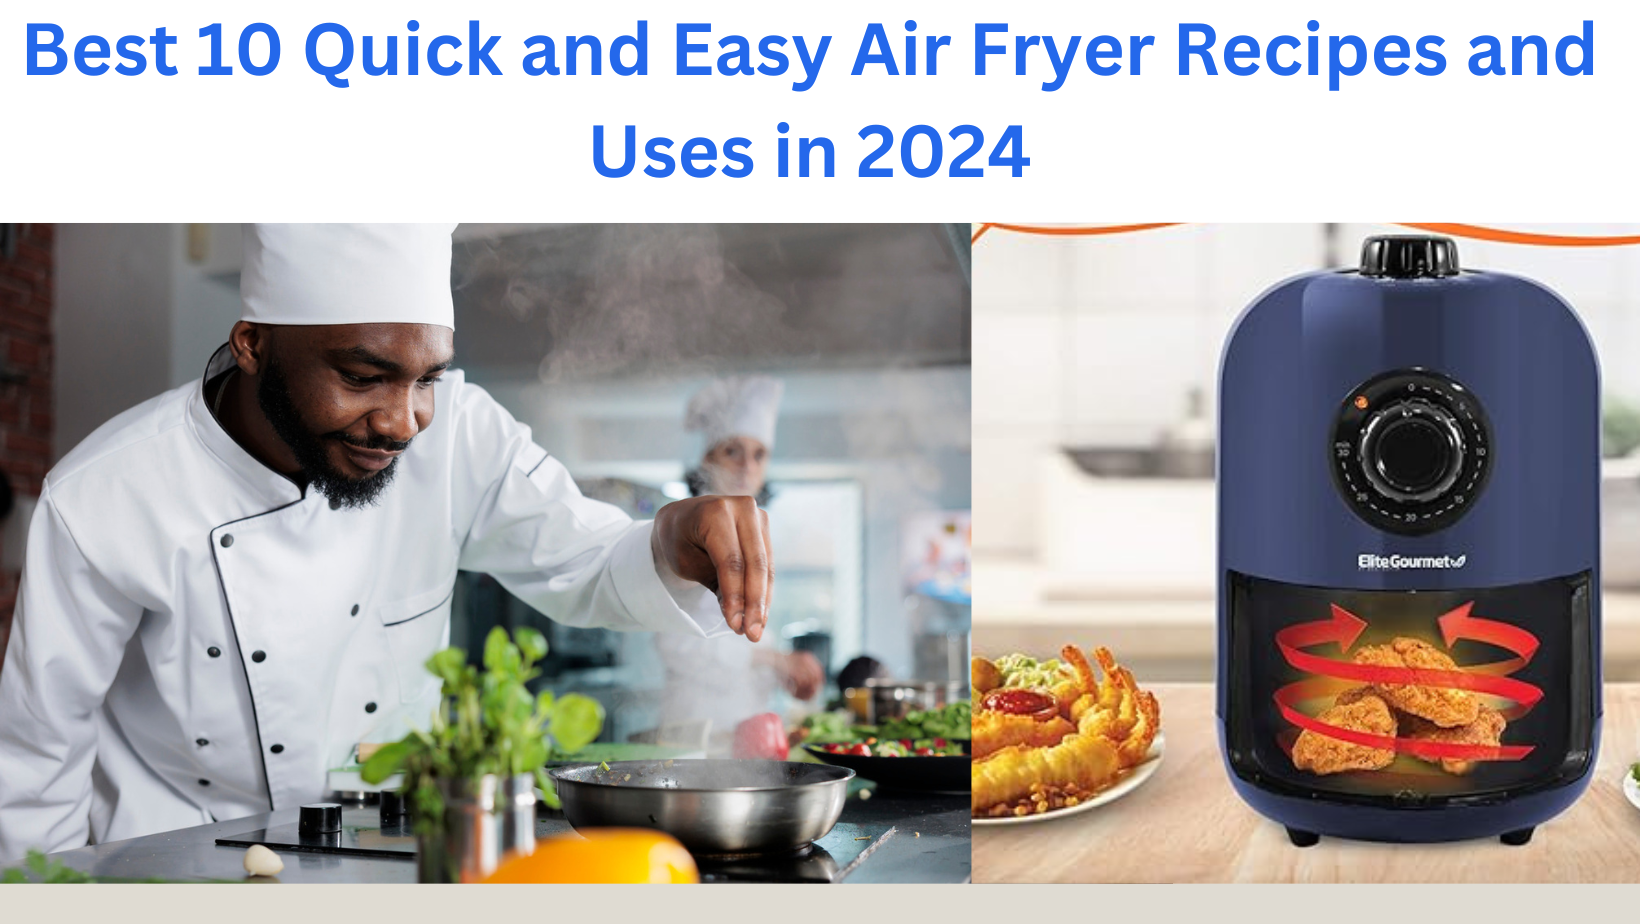 Best 10 Quick and Easy Air Fryer Recipes and Uses in 2024